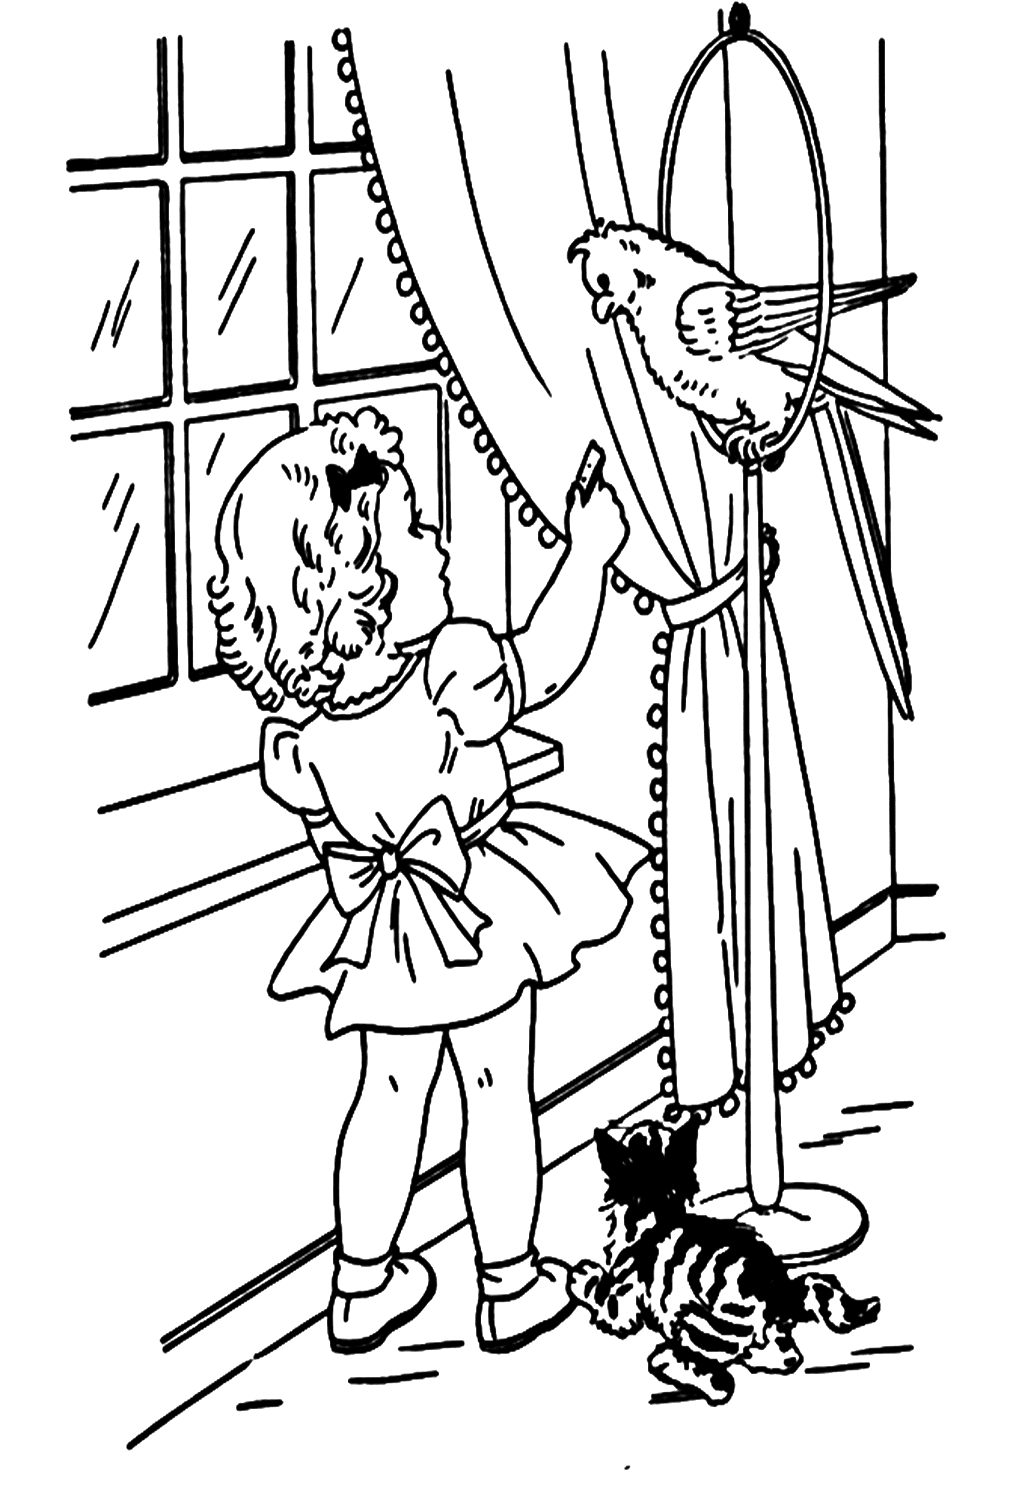 Polly Parakeet And Little Girl Coloring Page